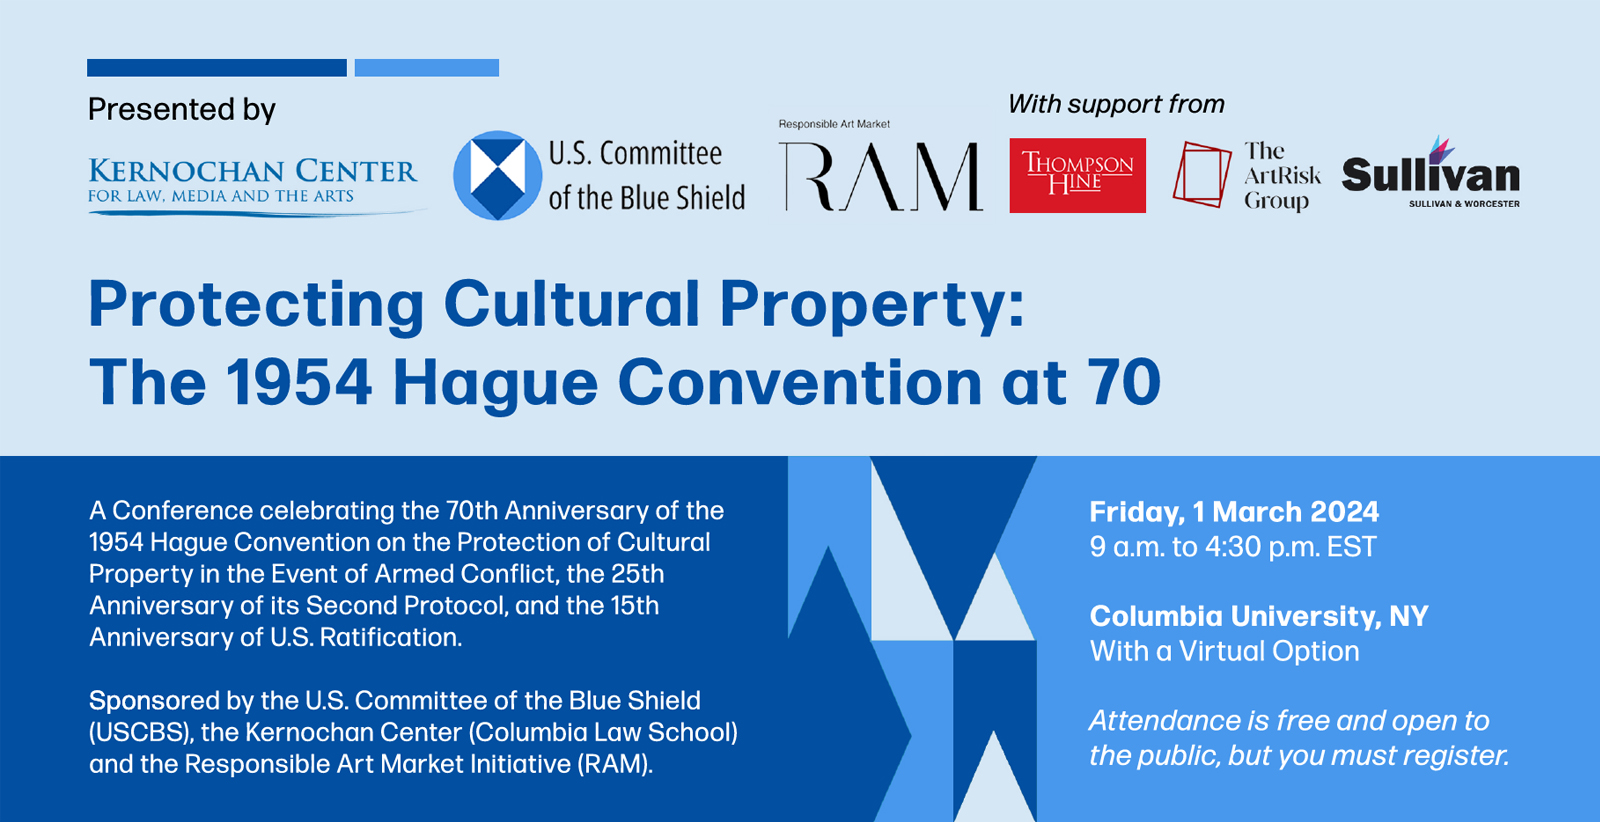 Protecting Cultural Property: The 1954 Hague Convention at 70